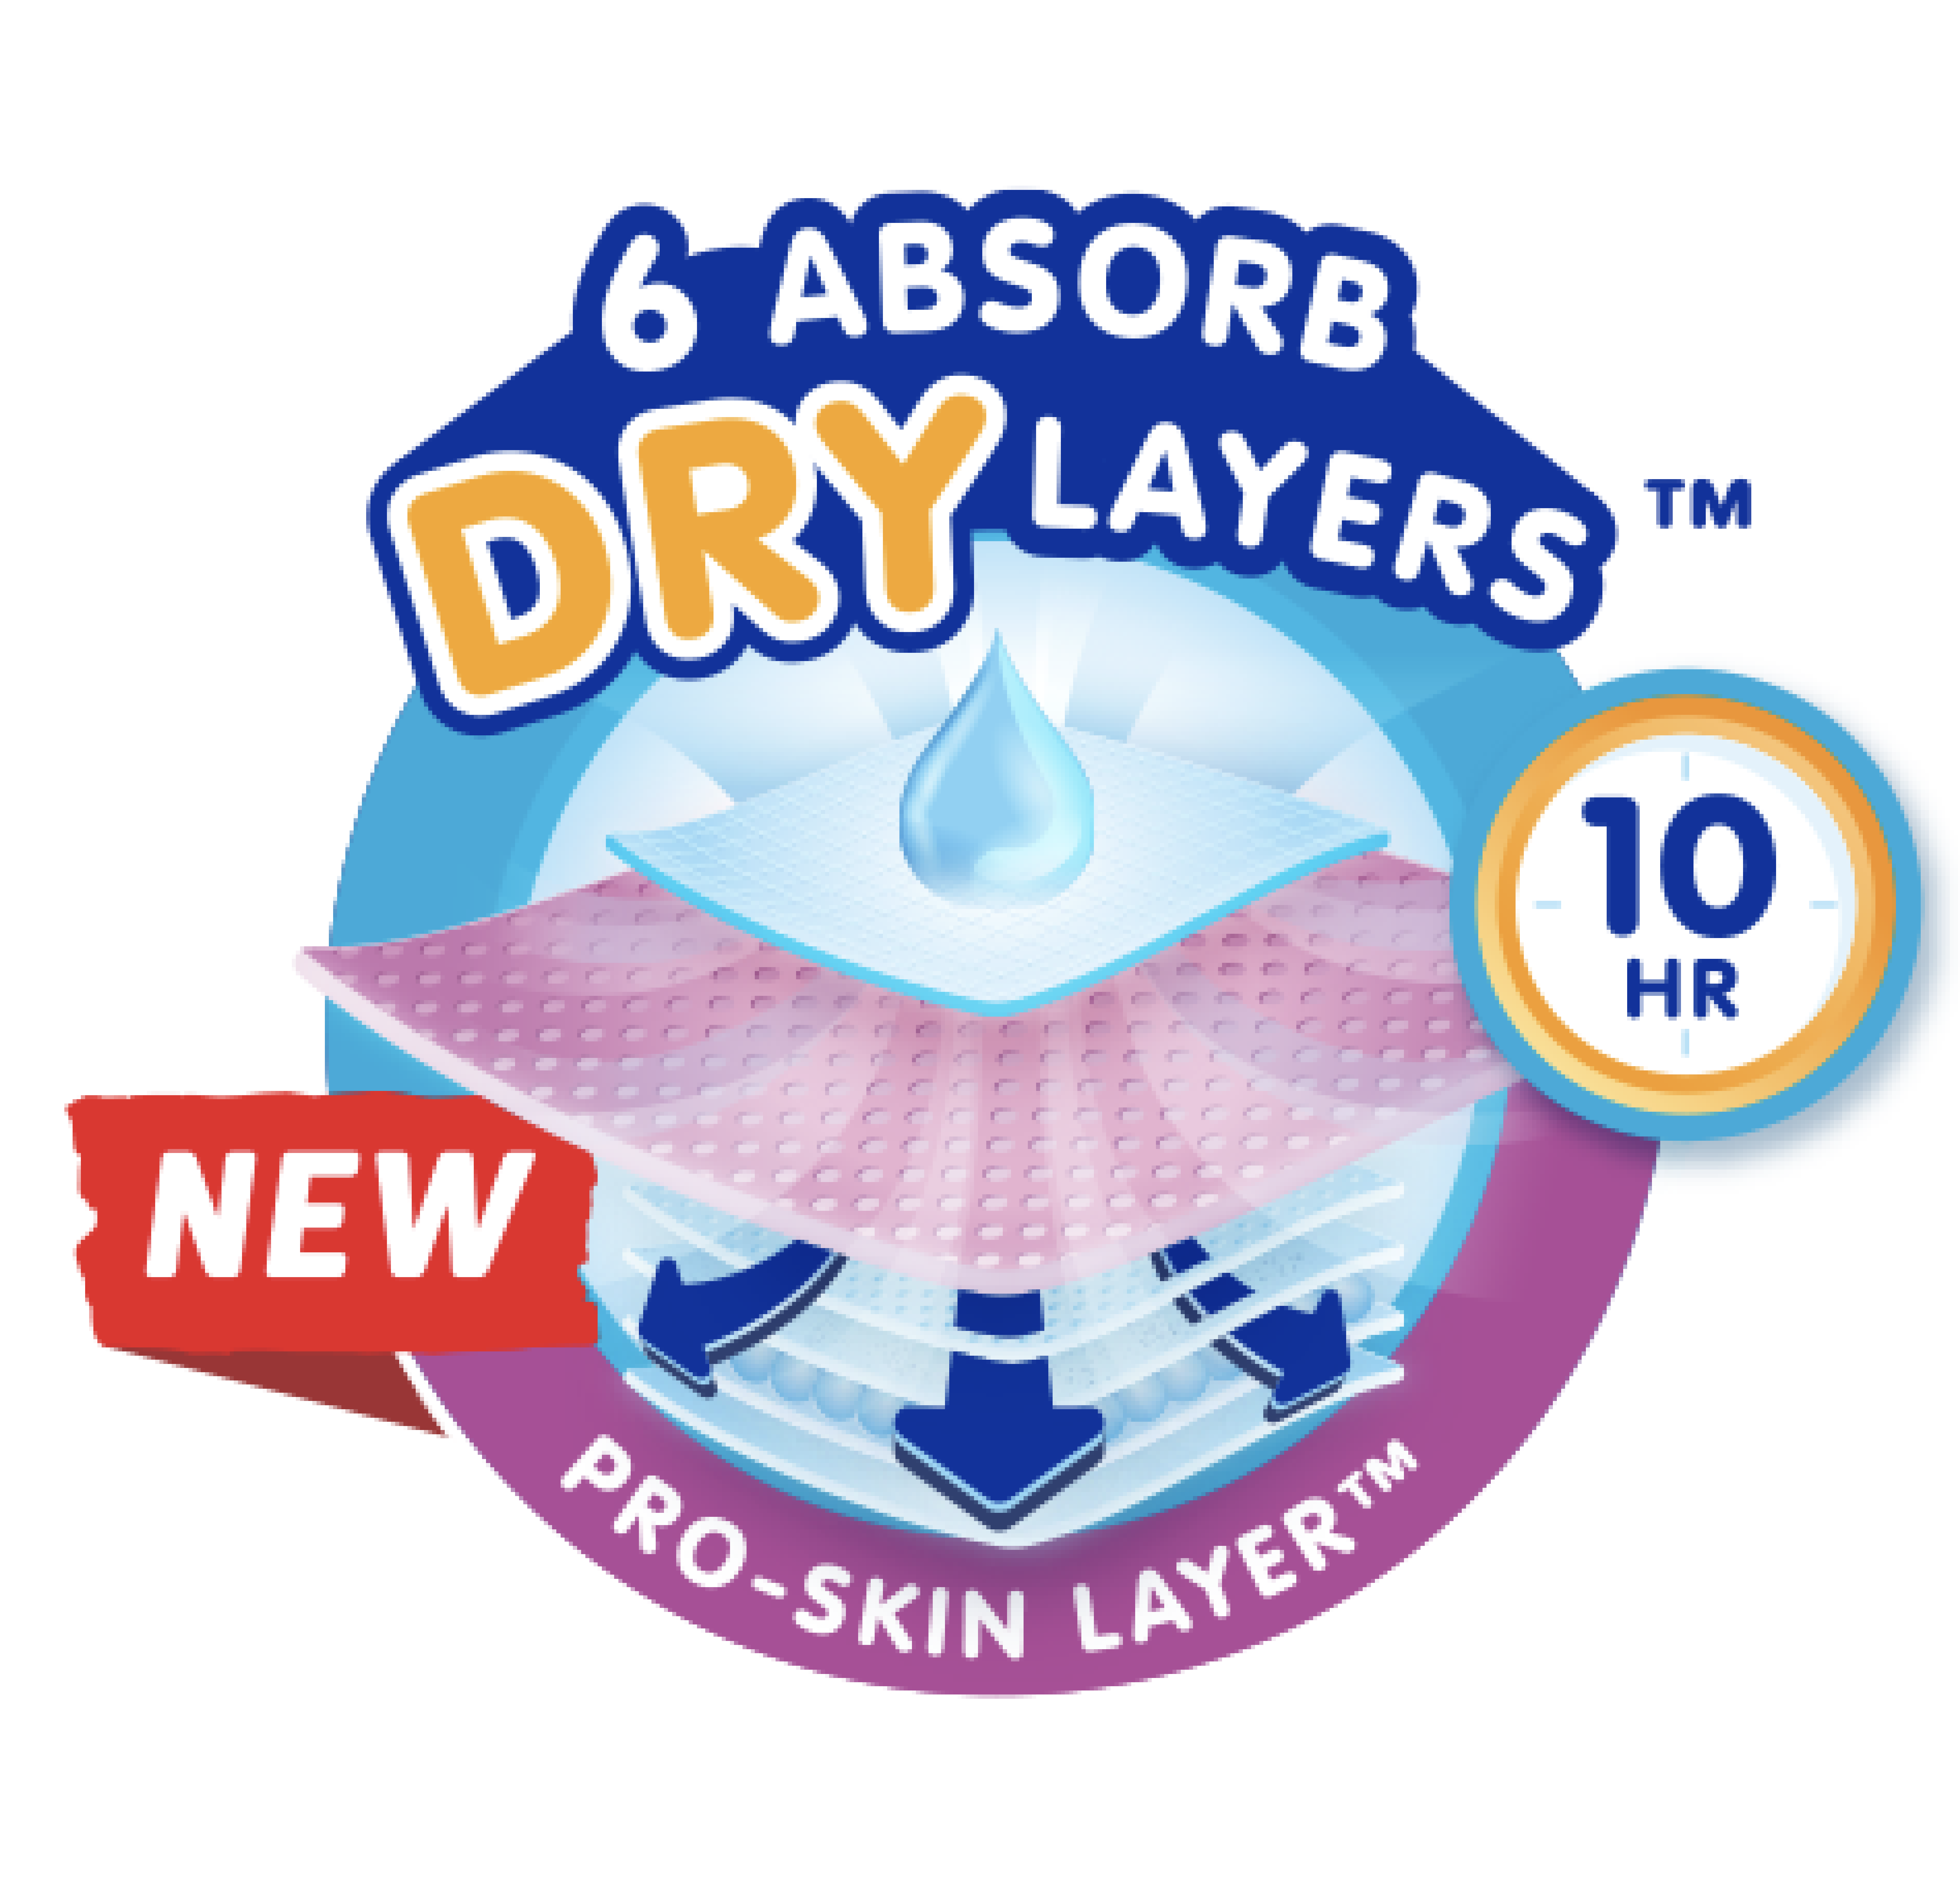 6 AbsorbDRY Layers